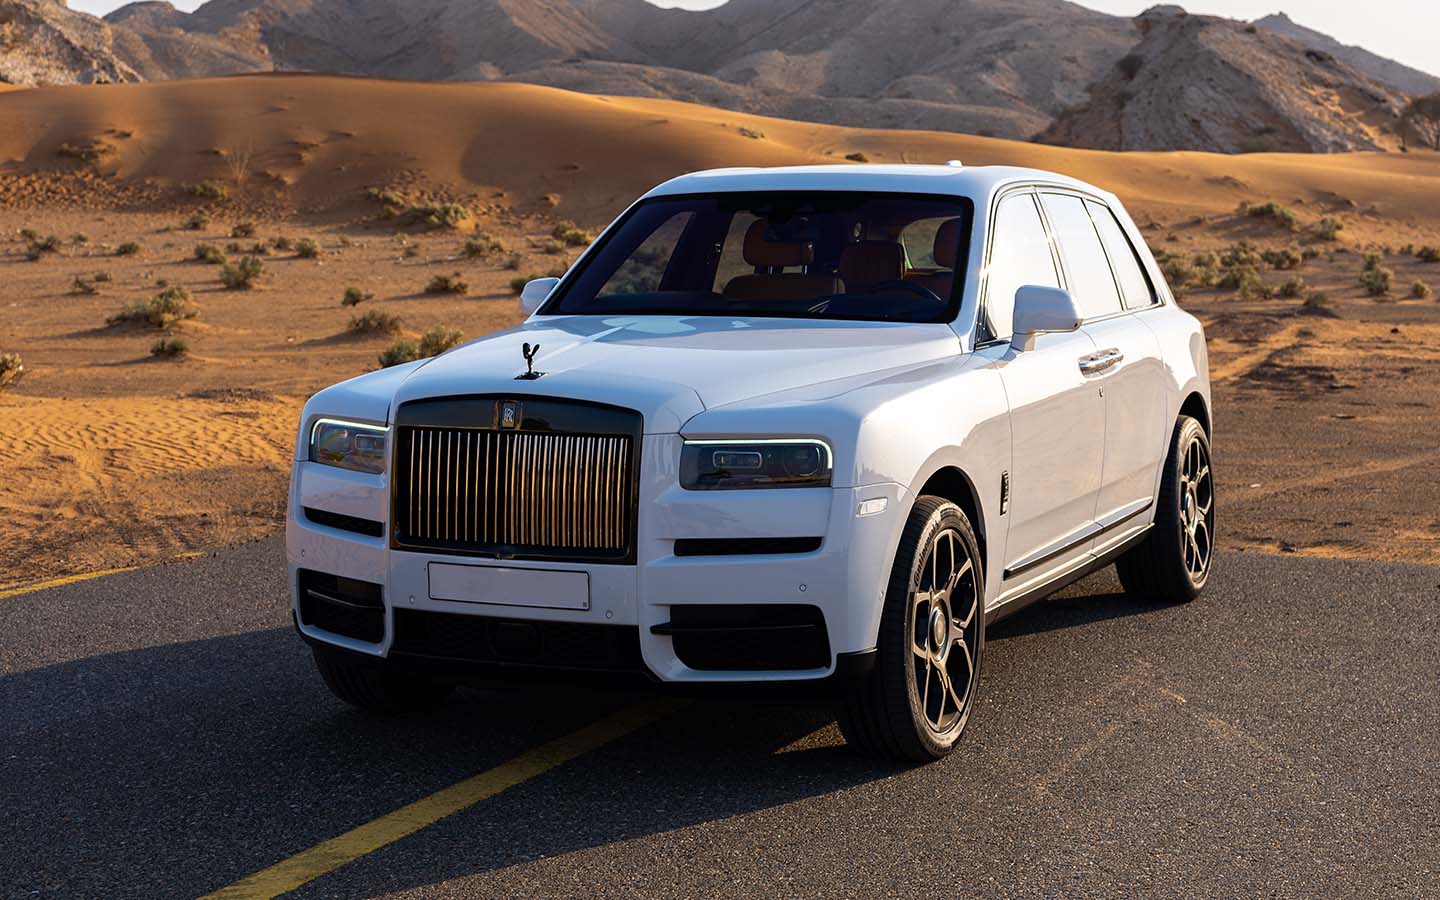 the cullinan is the first SUV by the luxury brand